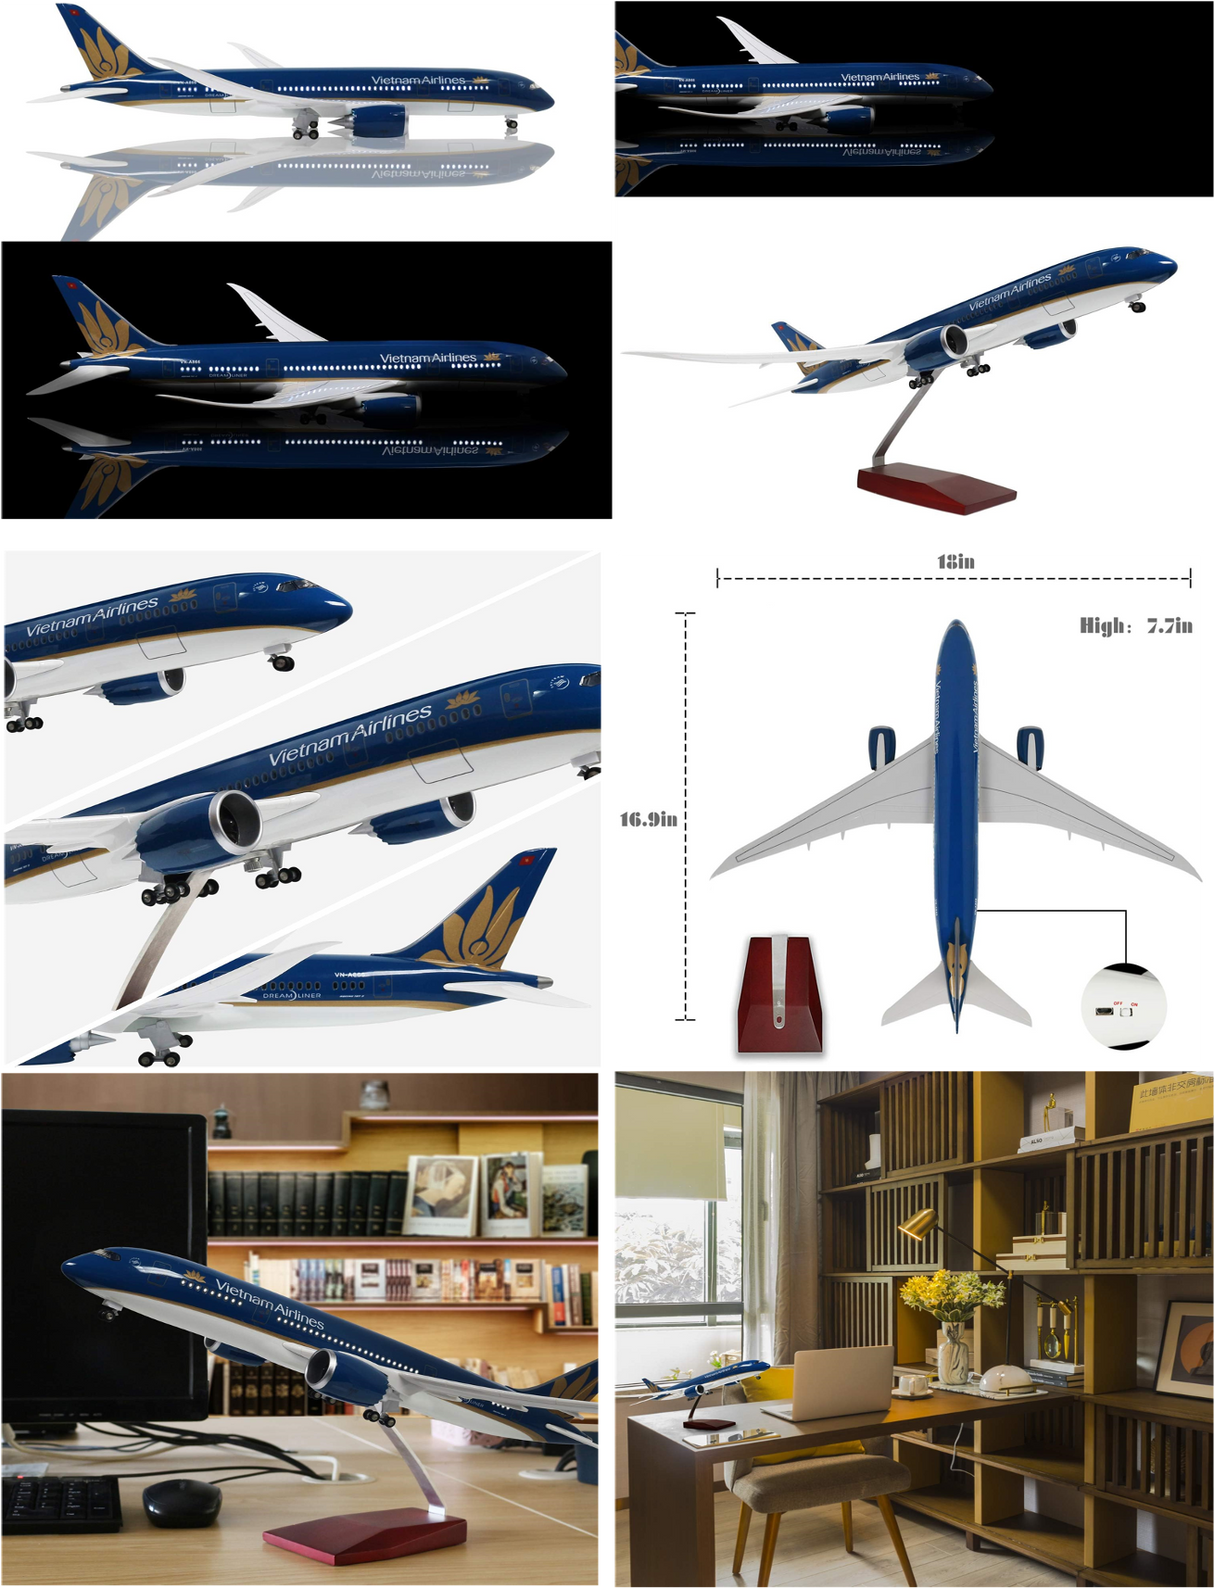 1:130 Airplane Model Vietnam Boeing 787 with LED Light(Touch or Sound Control) for Decoration or Gift